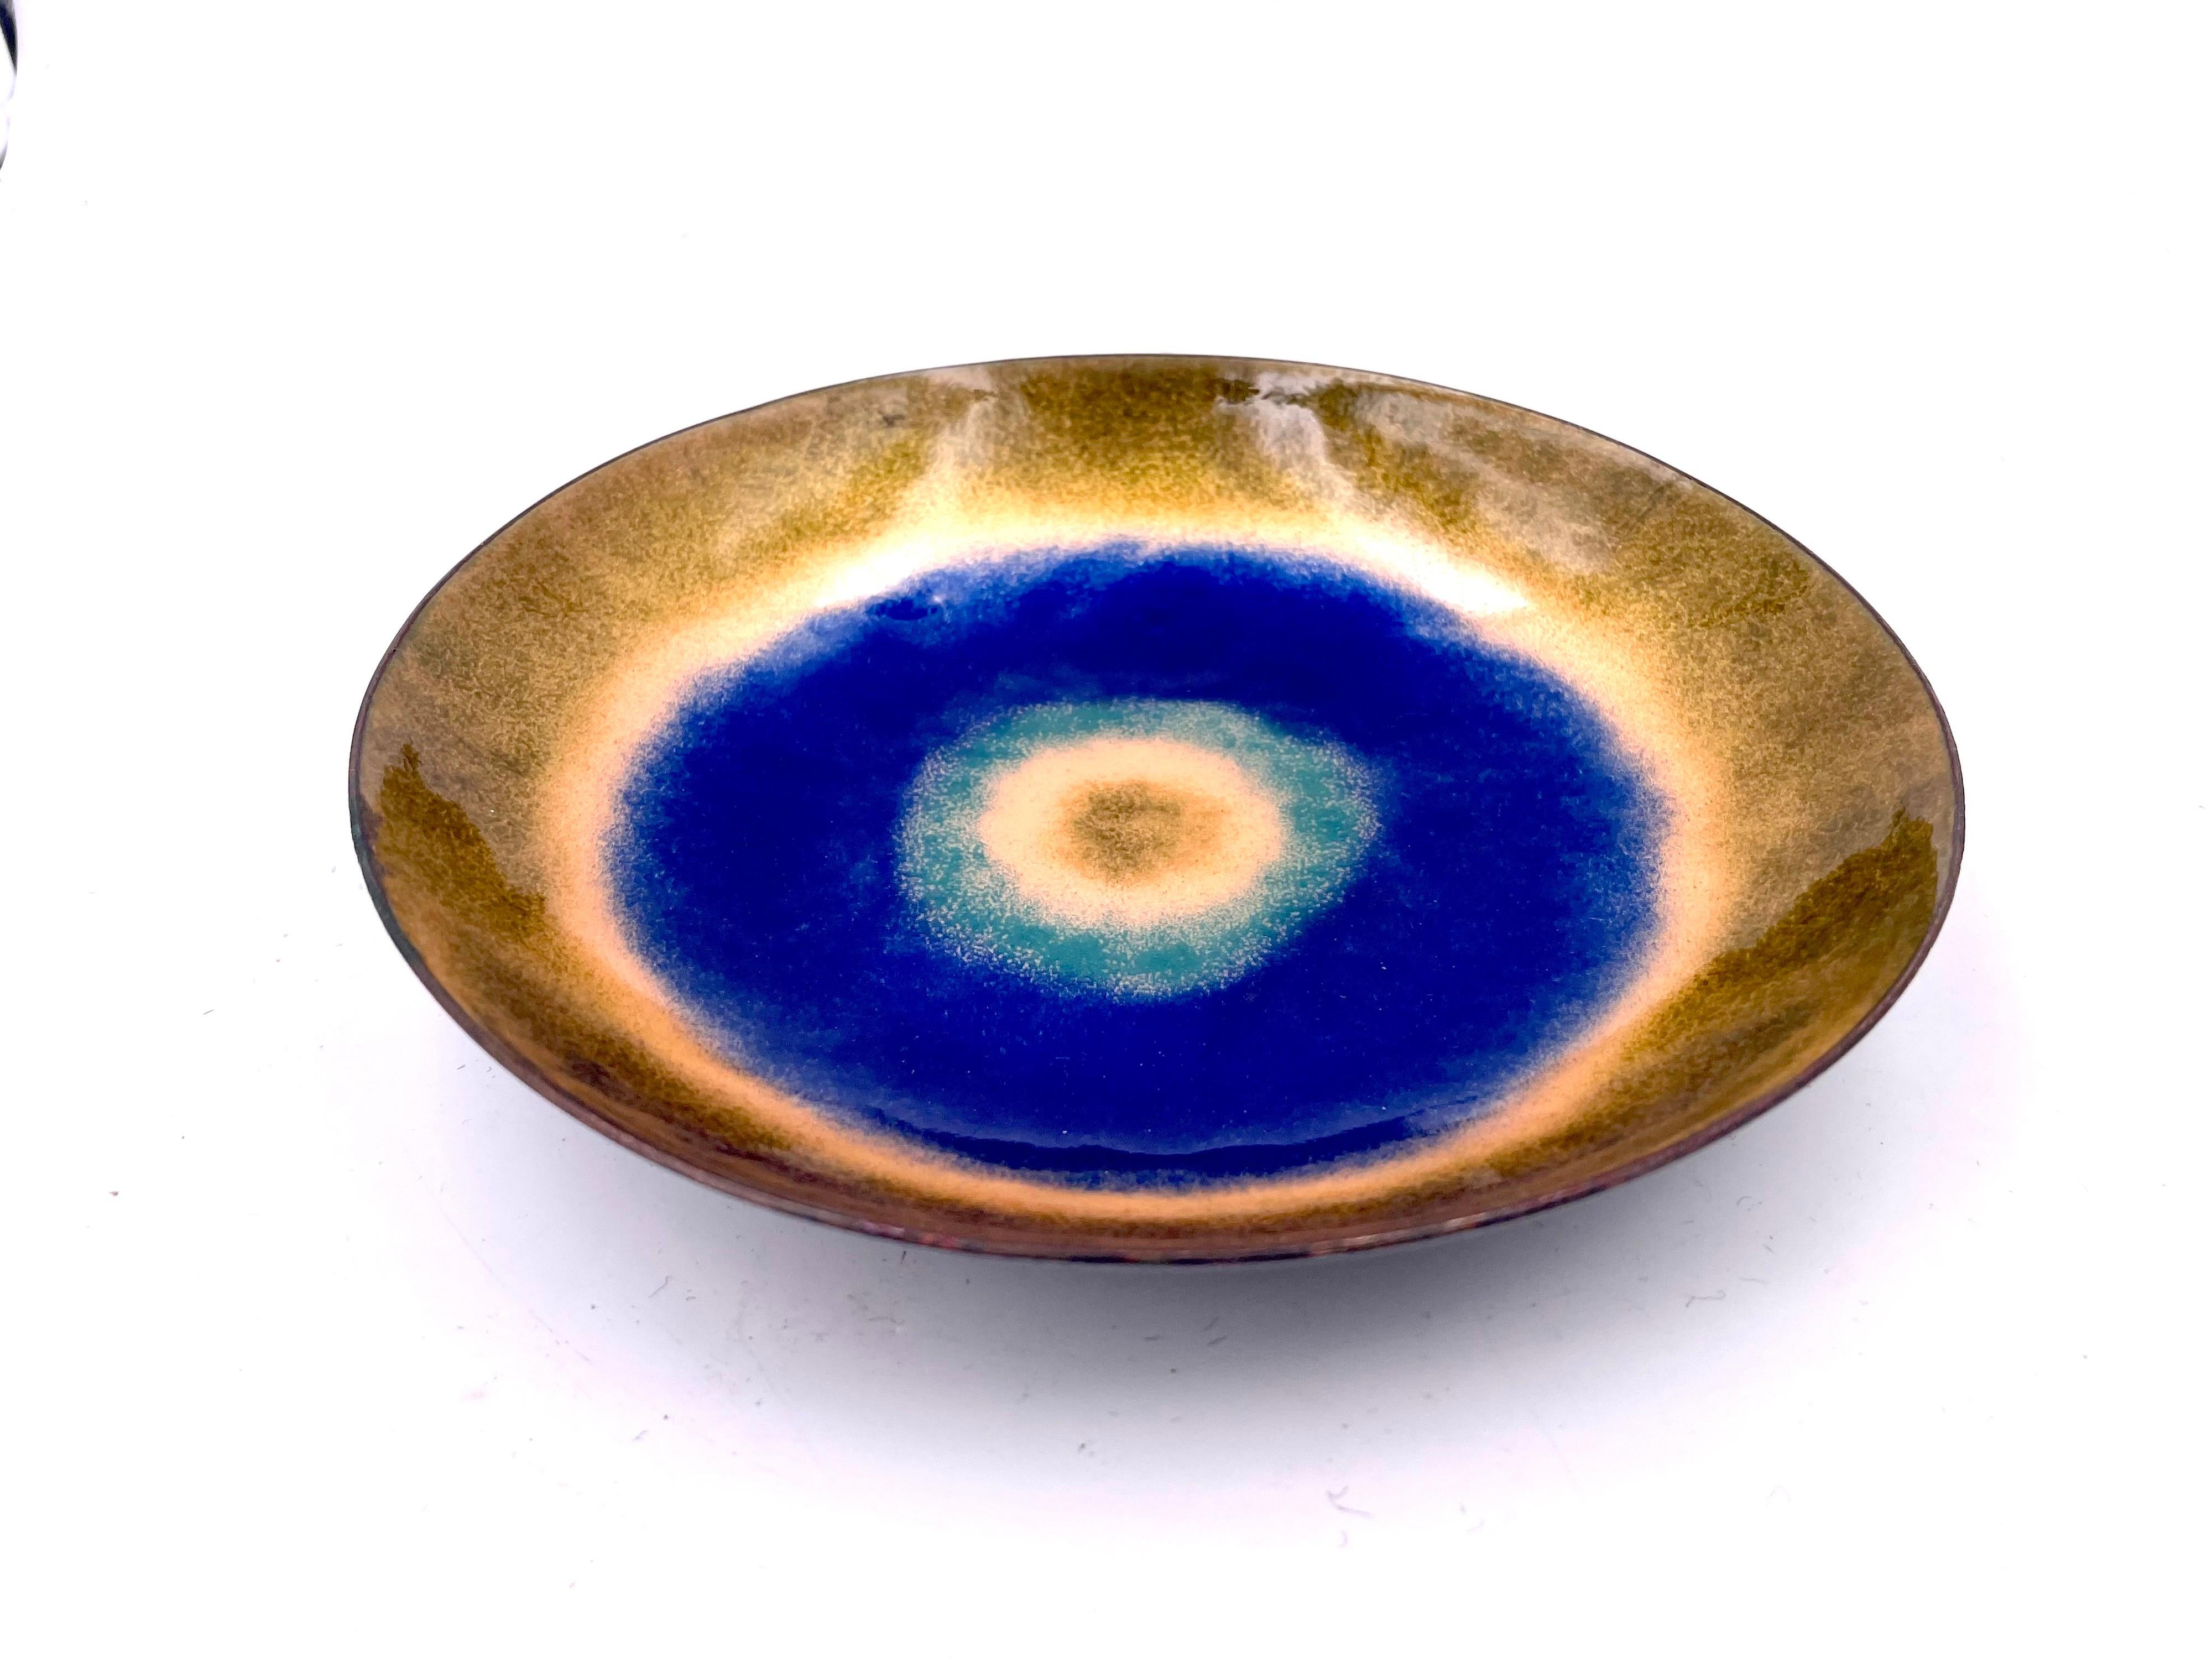 Great design and beautiful colors on this enamel on a copper abstract bowl, in great condition with no chips. By California artist Rosemarie Toogood.